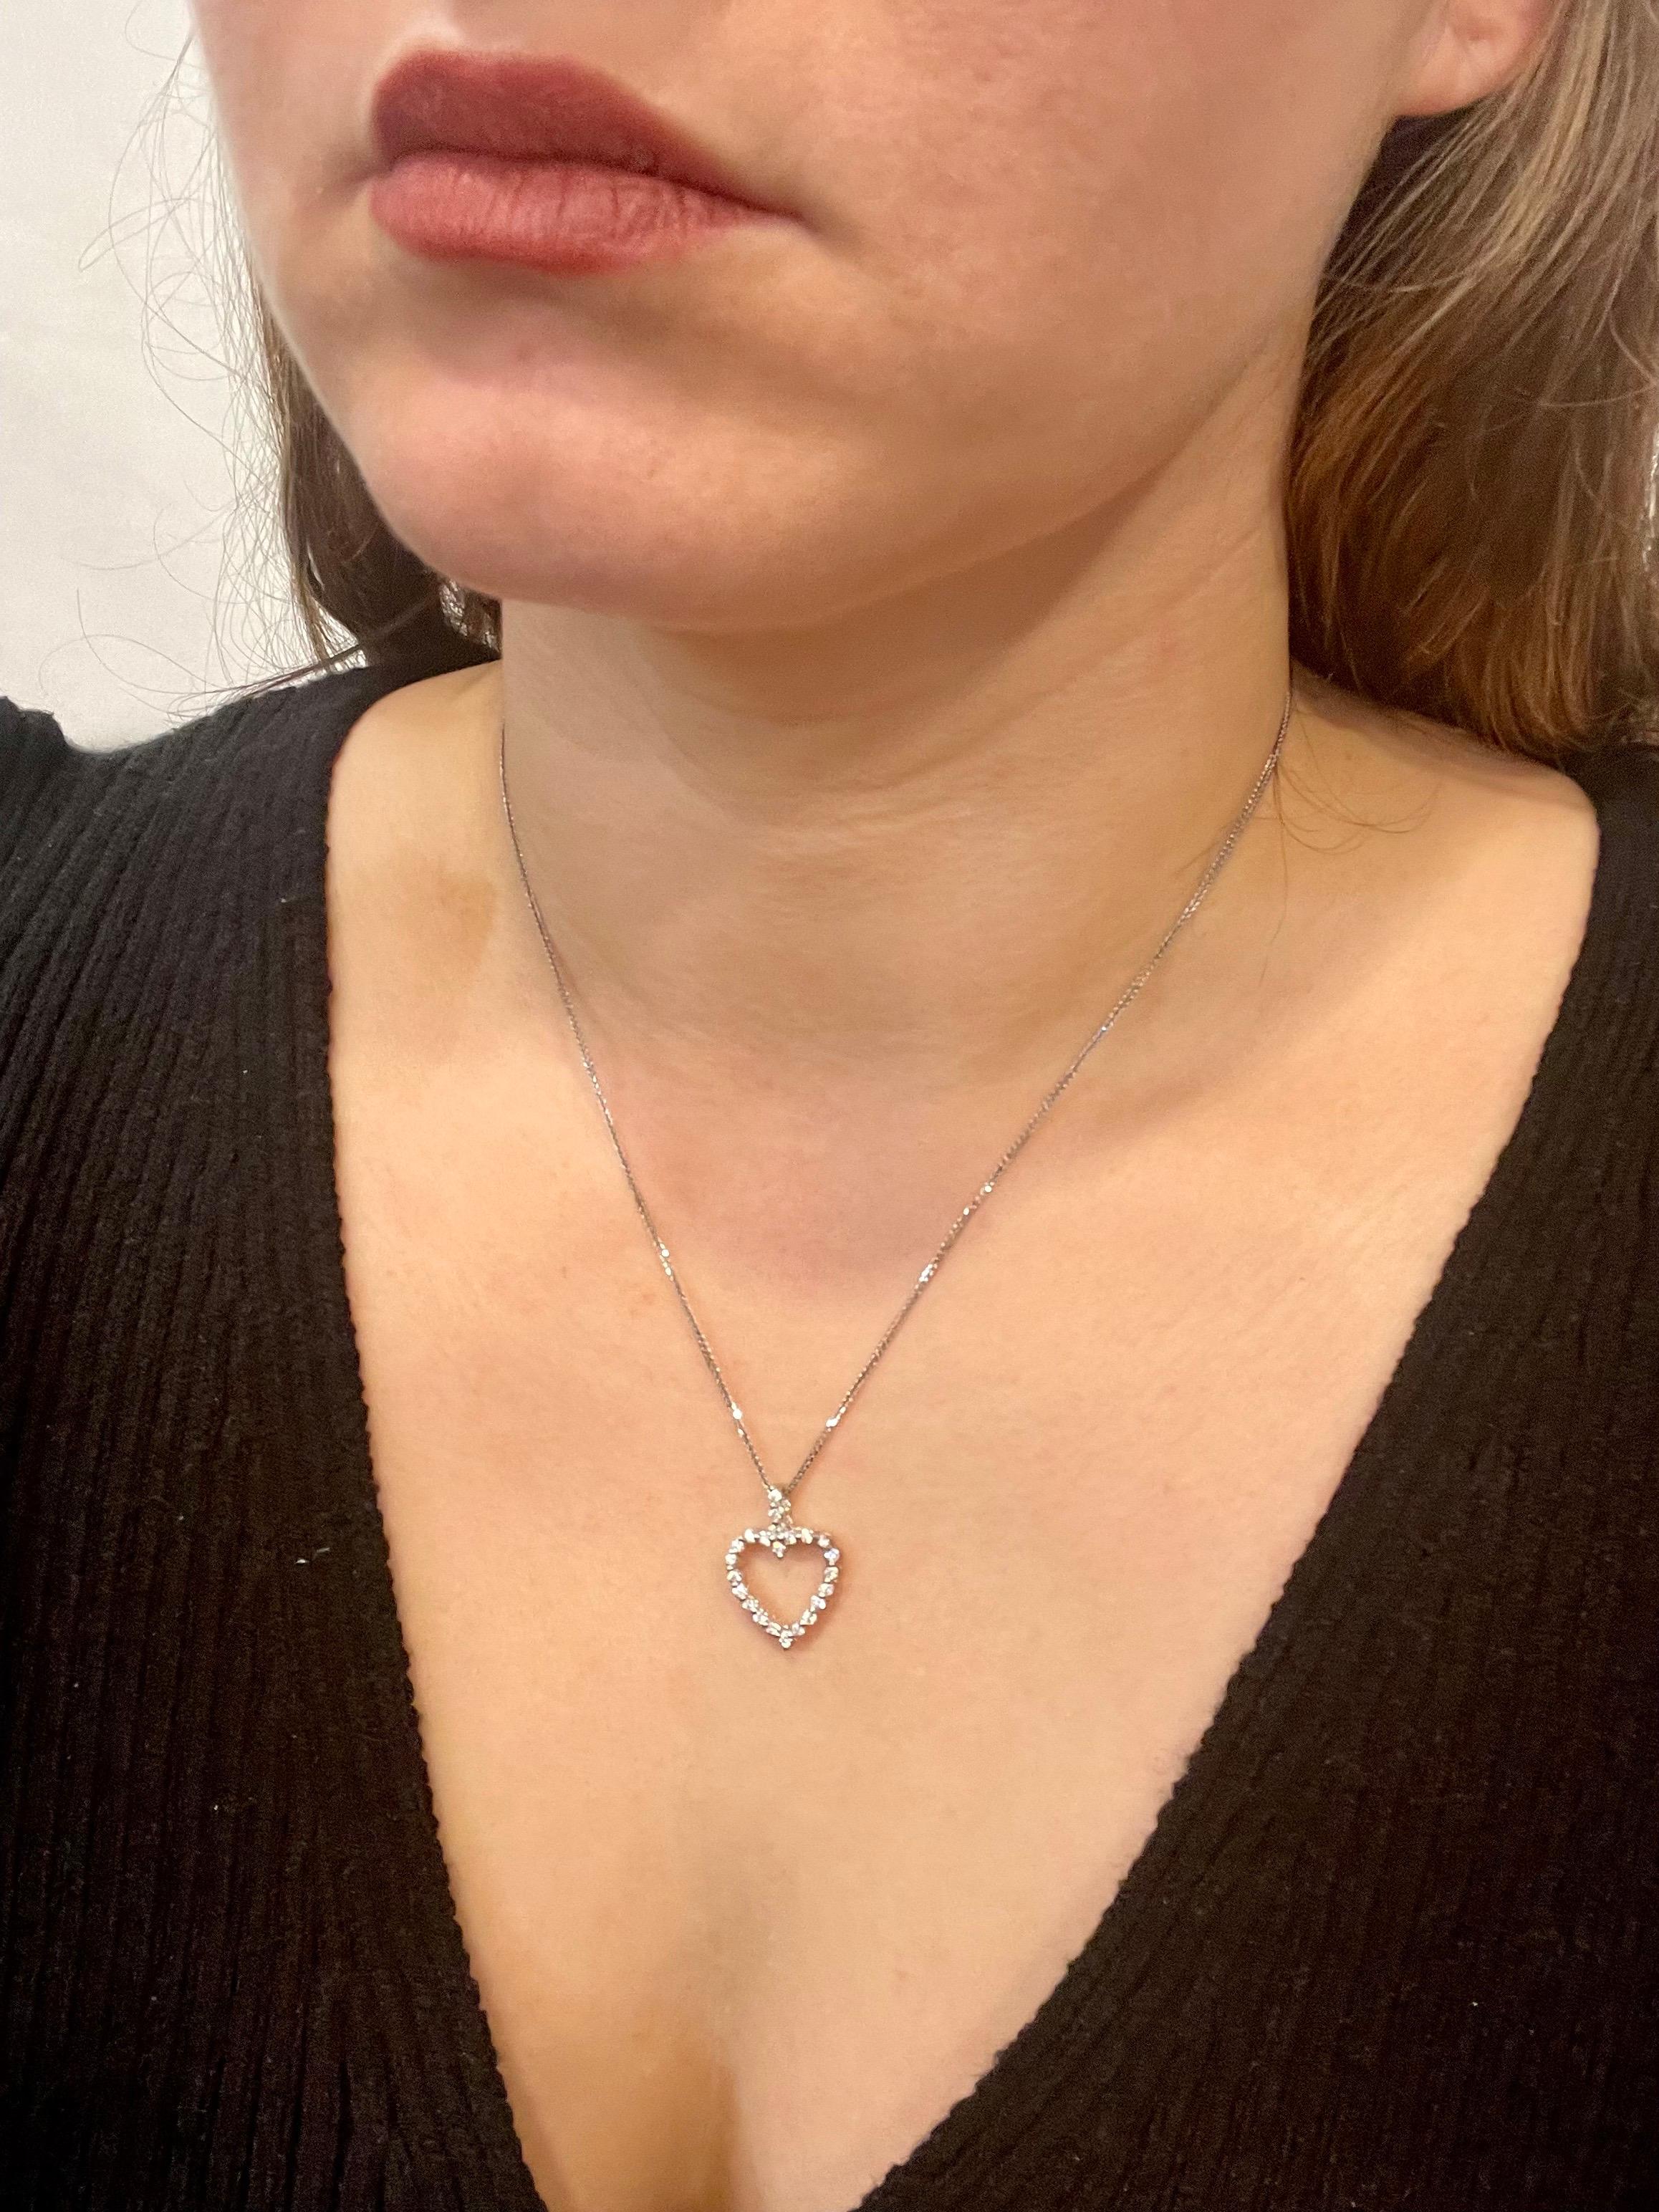 1 Carat Diamond Heart Pendant/ Necklace 14 Karat White Gold with Chain For Sale 7